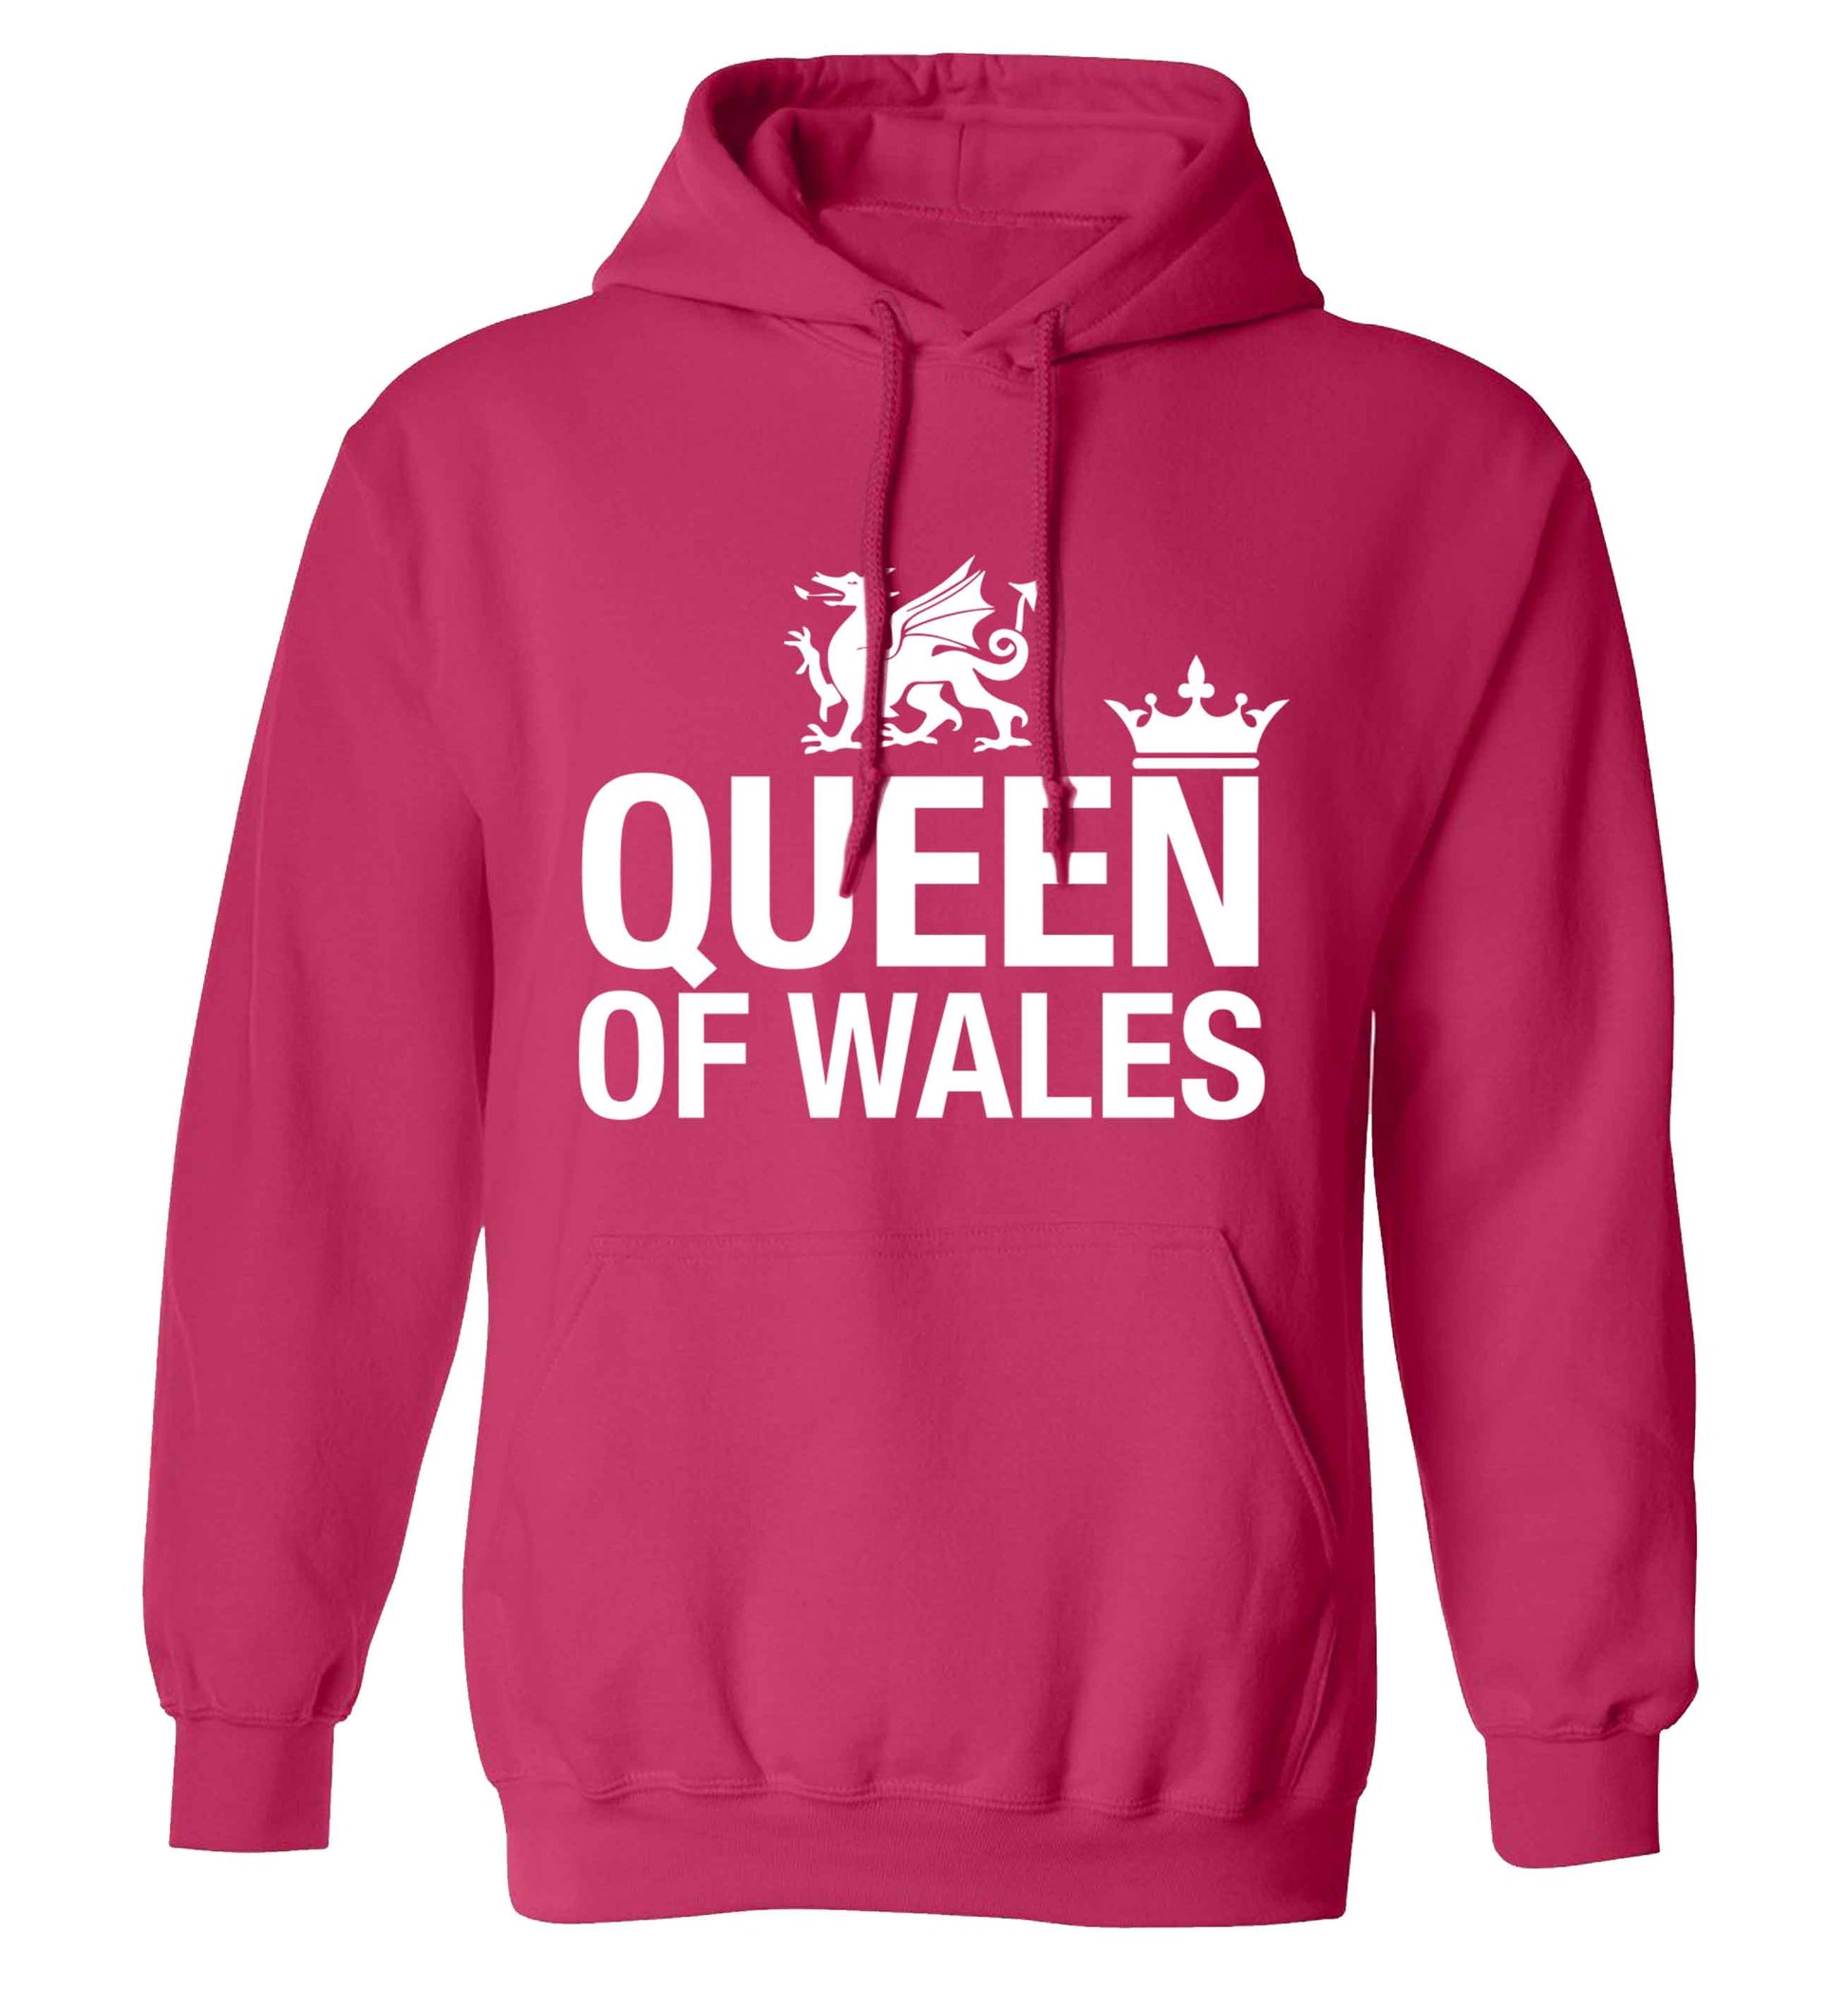 Queen of Wales adults unisex pink hoodie 2XL